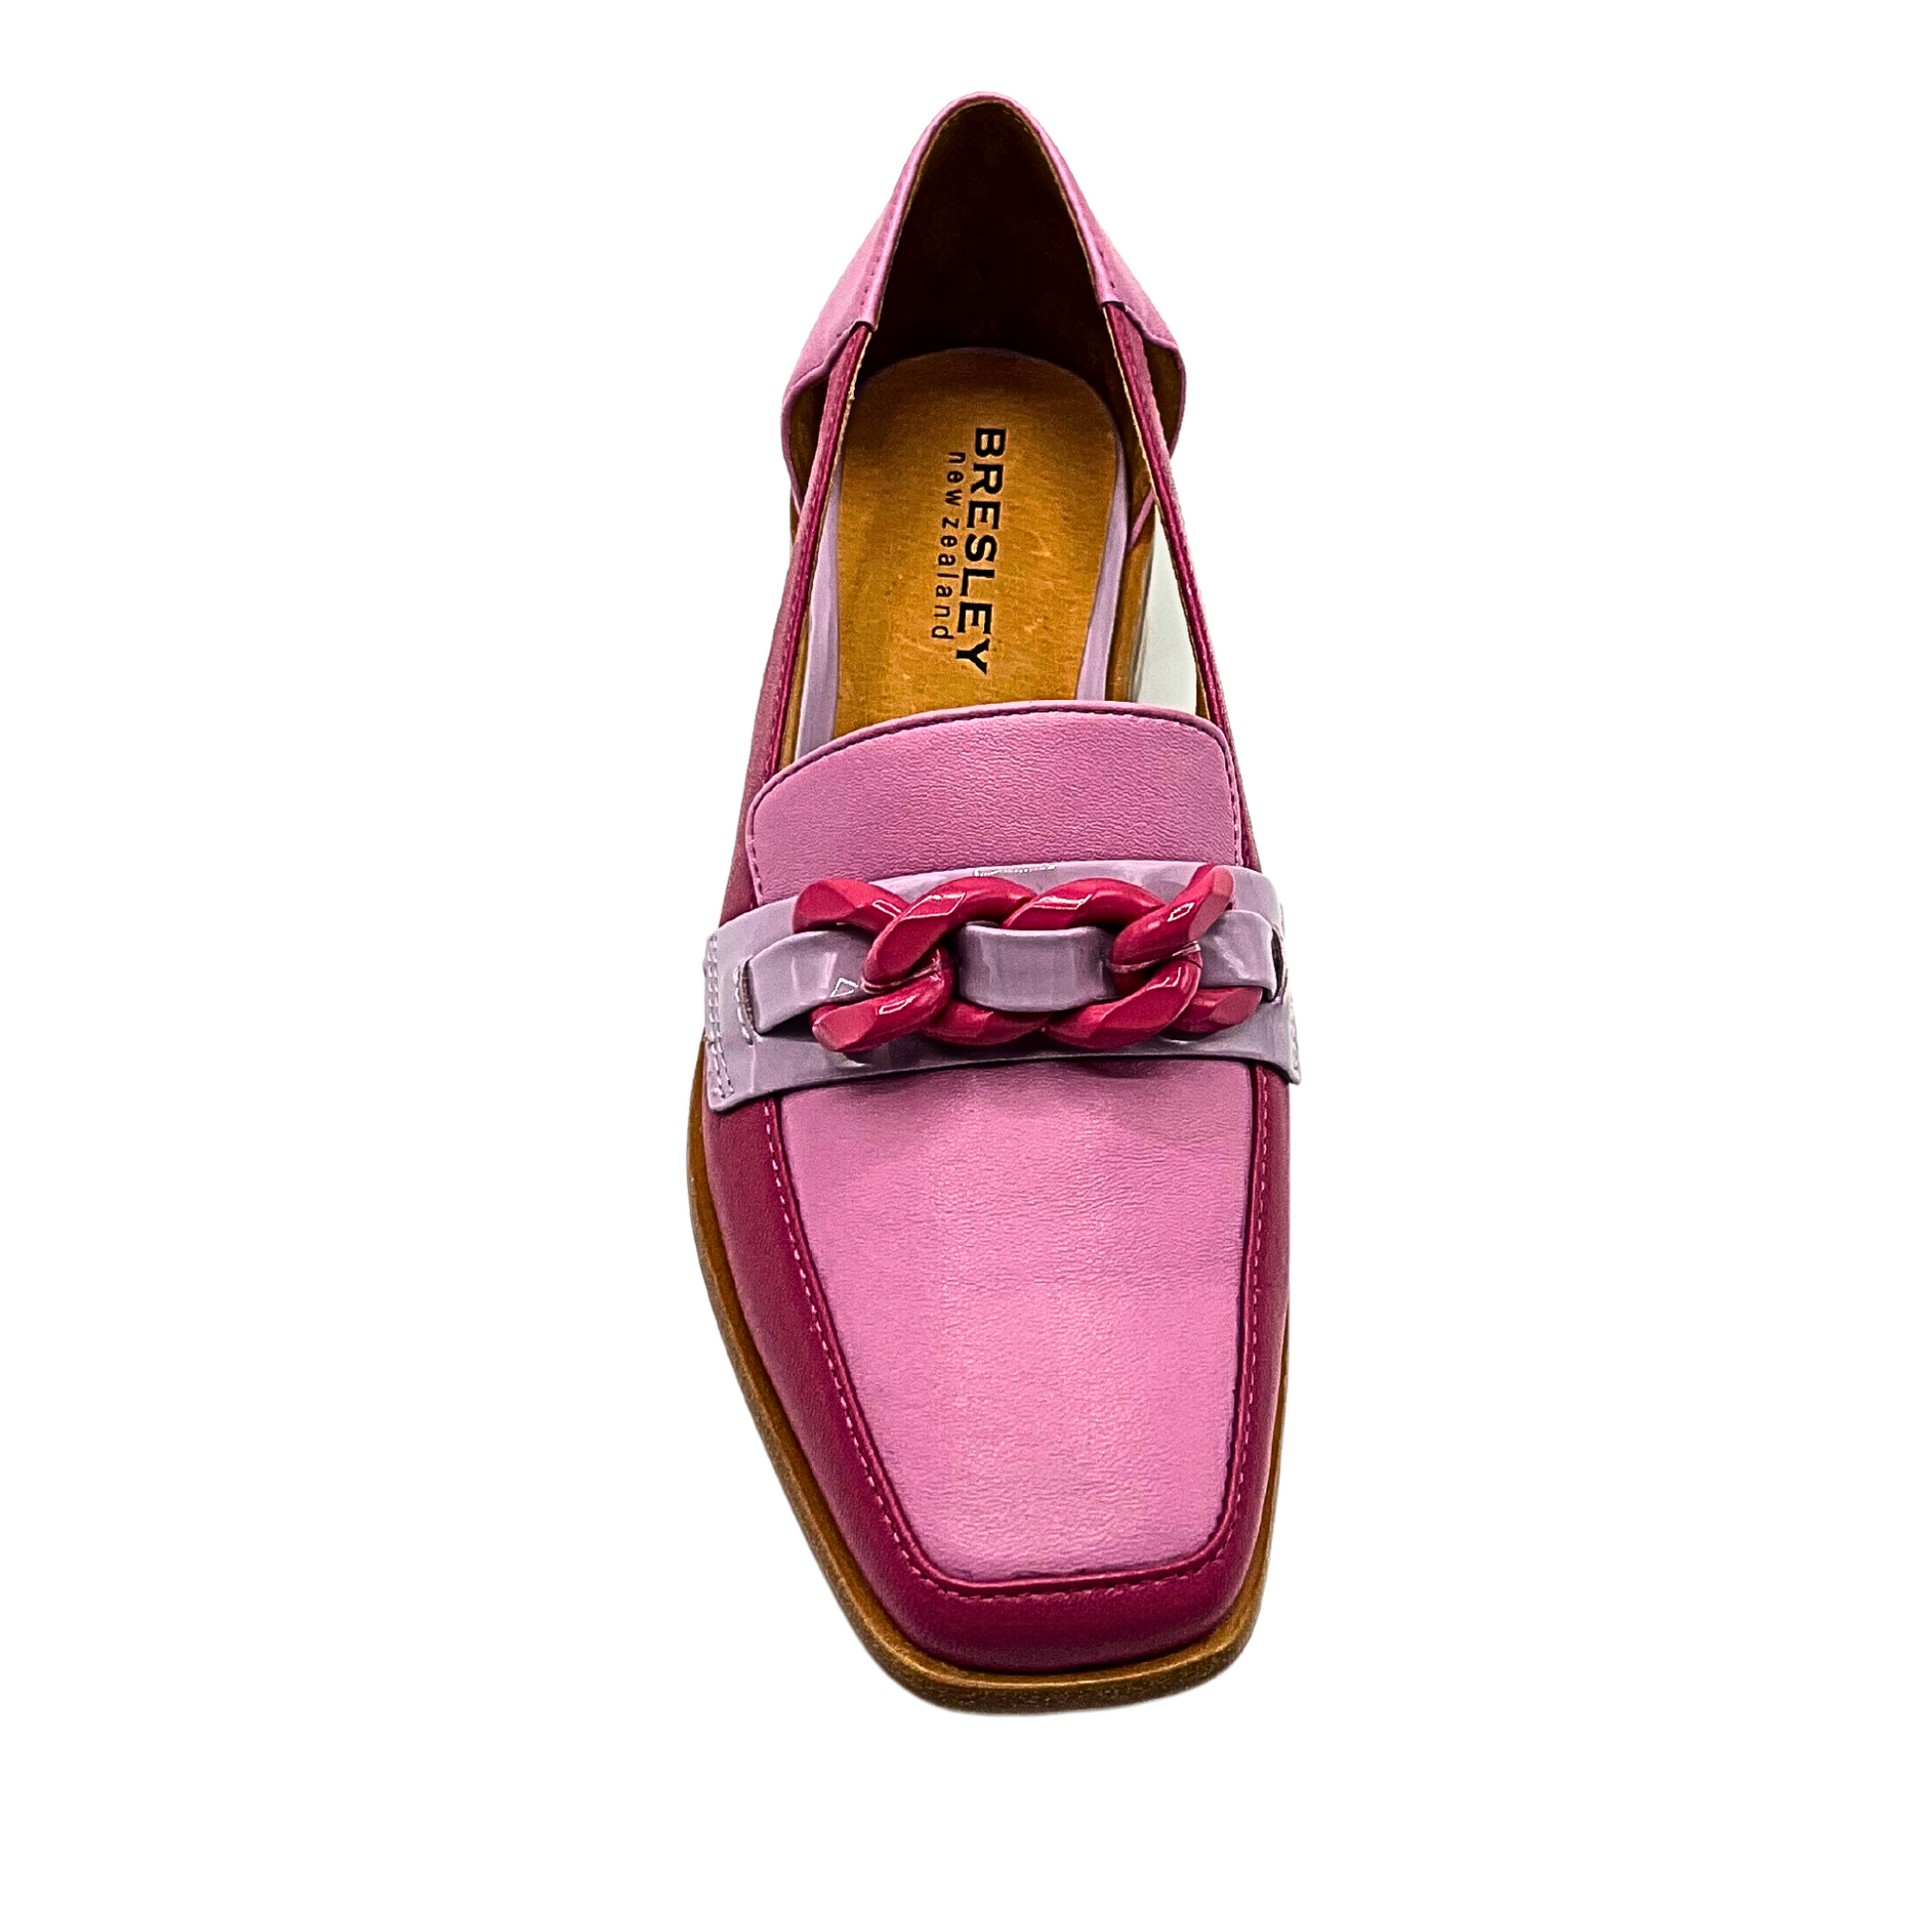 Top down view of loafer in a fuschia color body with pink top and silver band at forefoot.  Fuschia chain detail across silver band